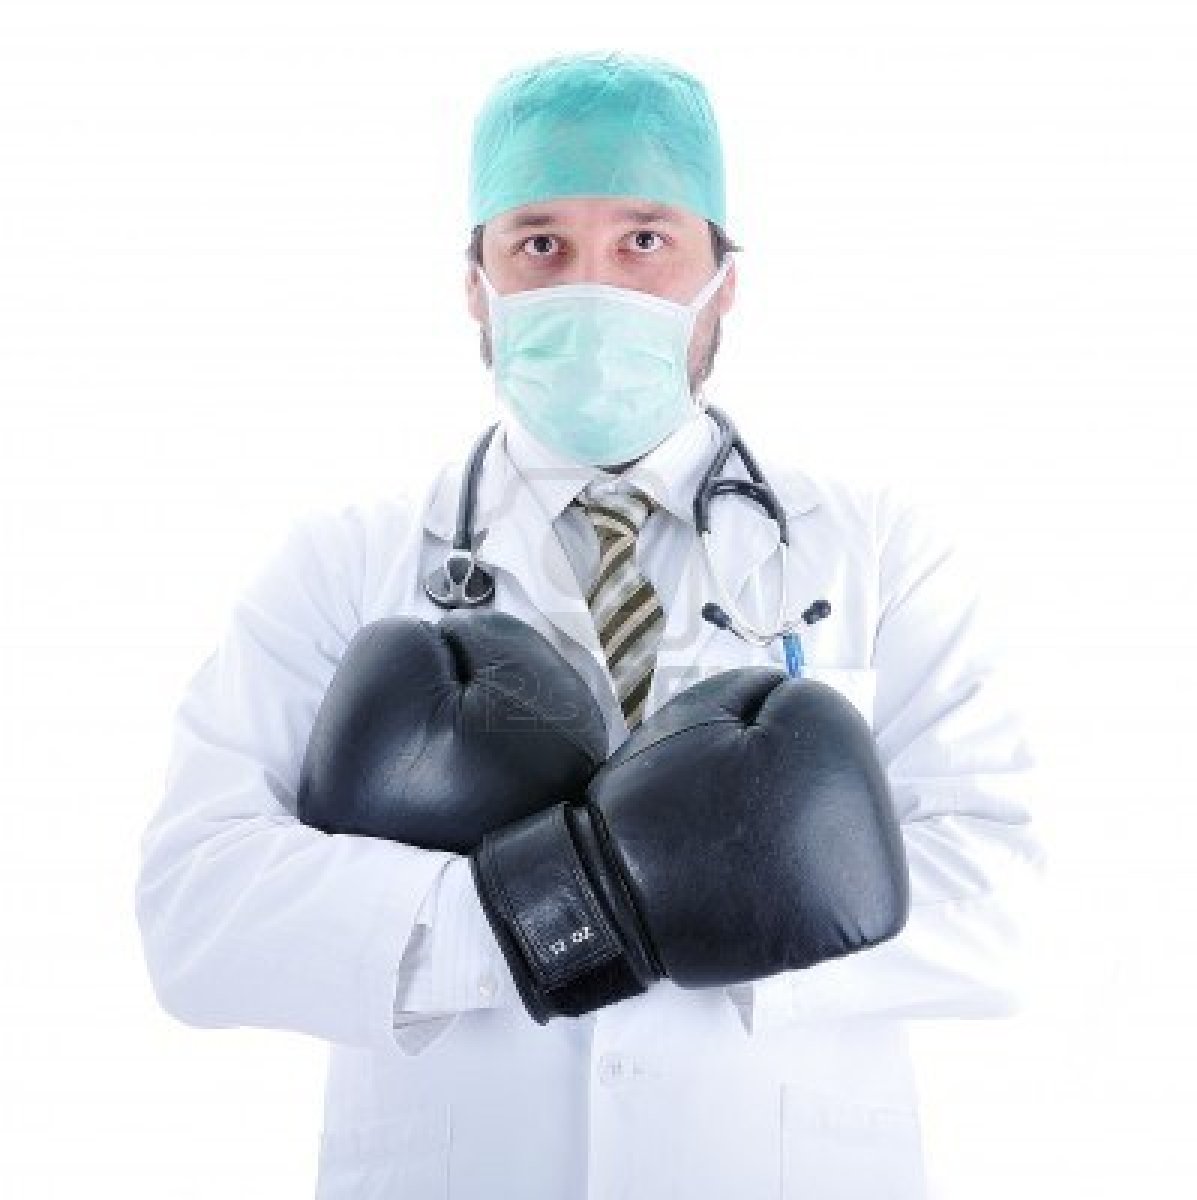 6011940-young-doctor-with-boxing-gloves.jpg